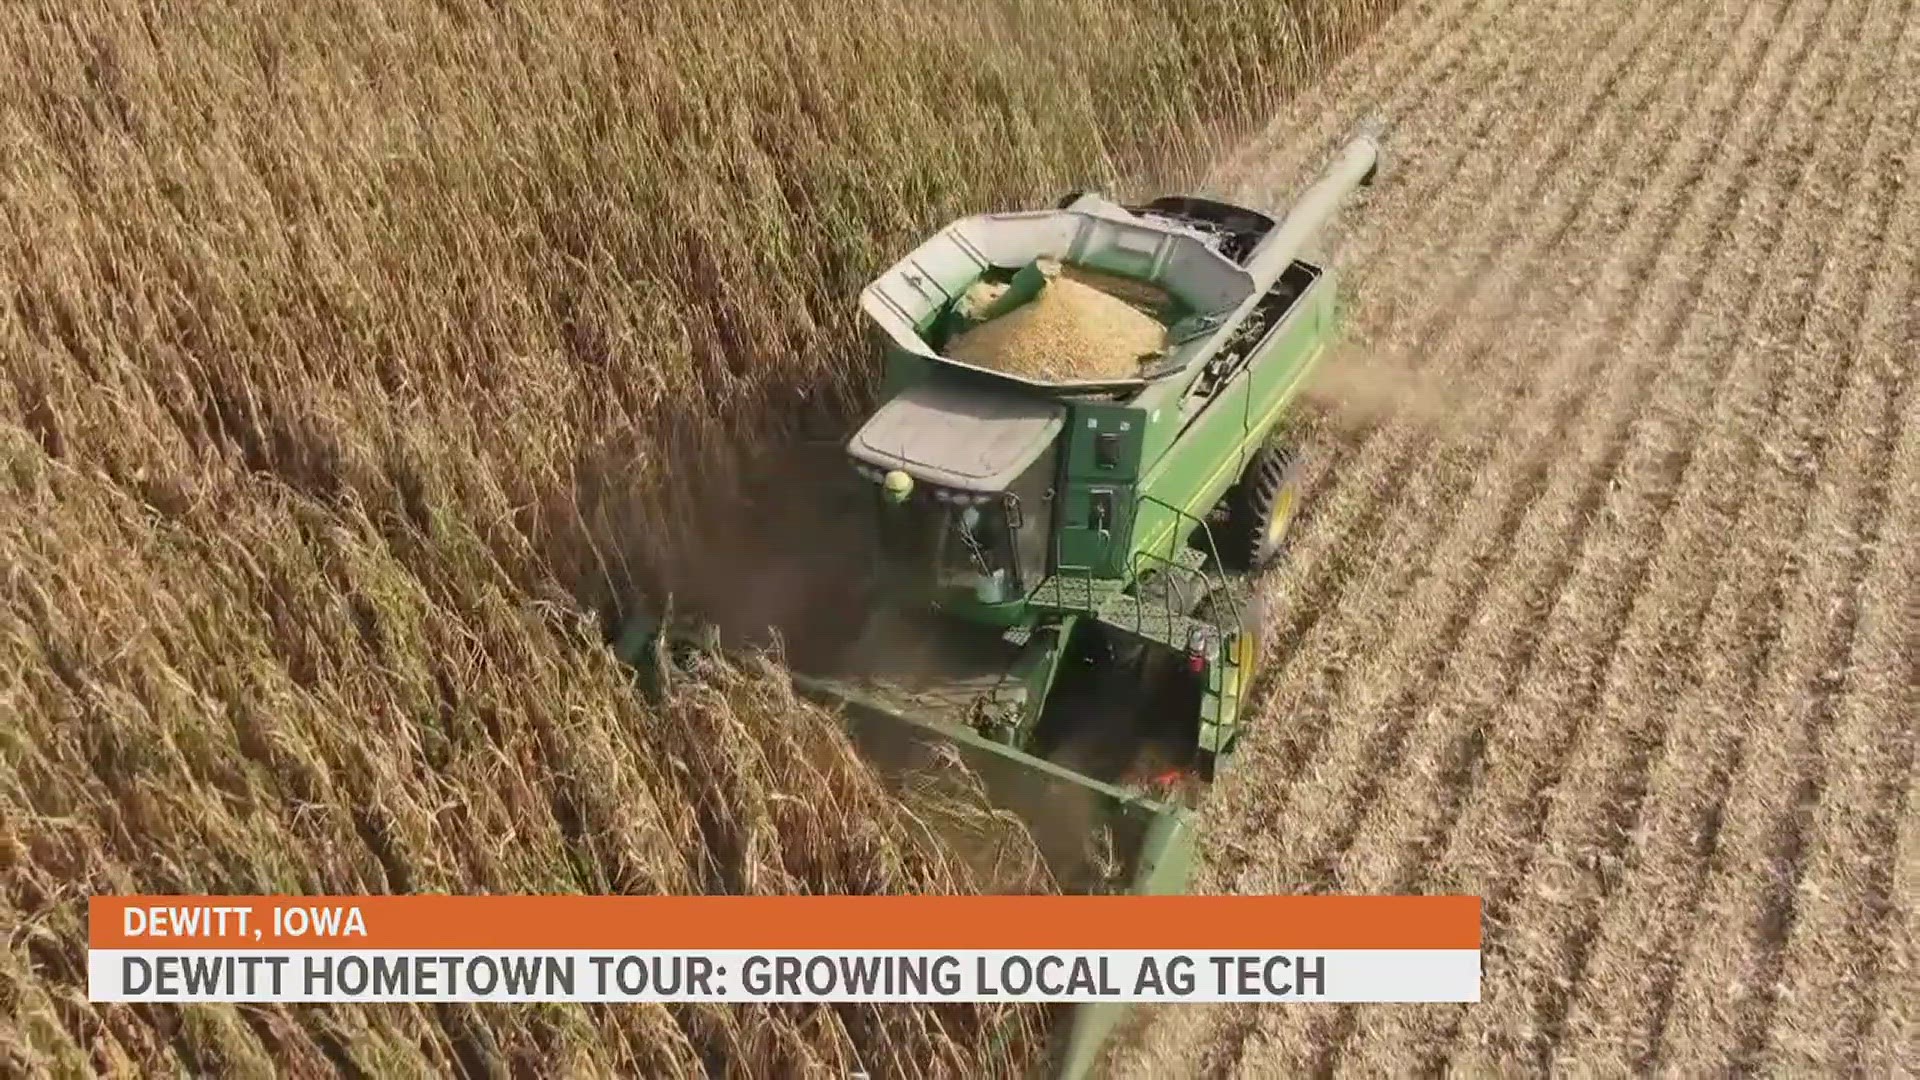 Many companies in DeWitt are creating new agricultural technologies being used all over the country.